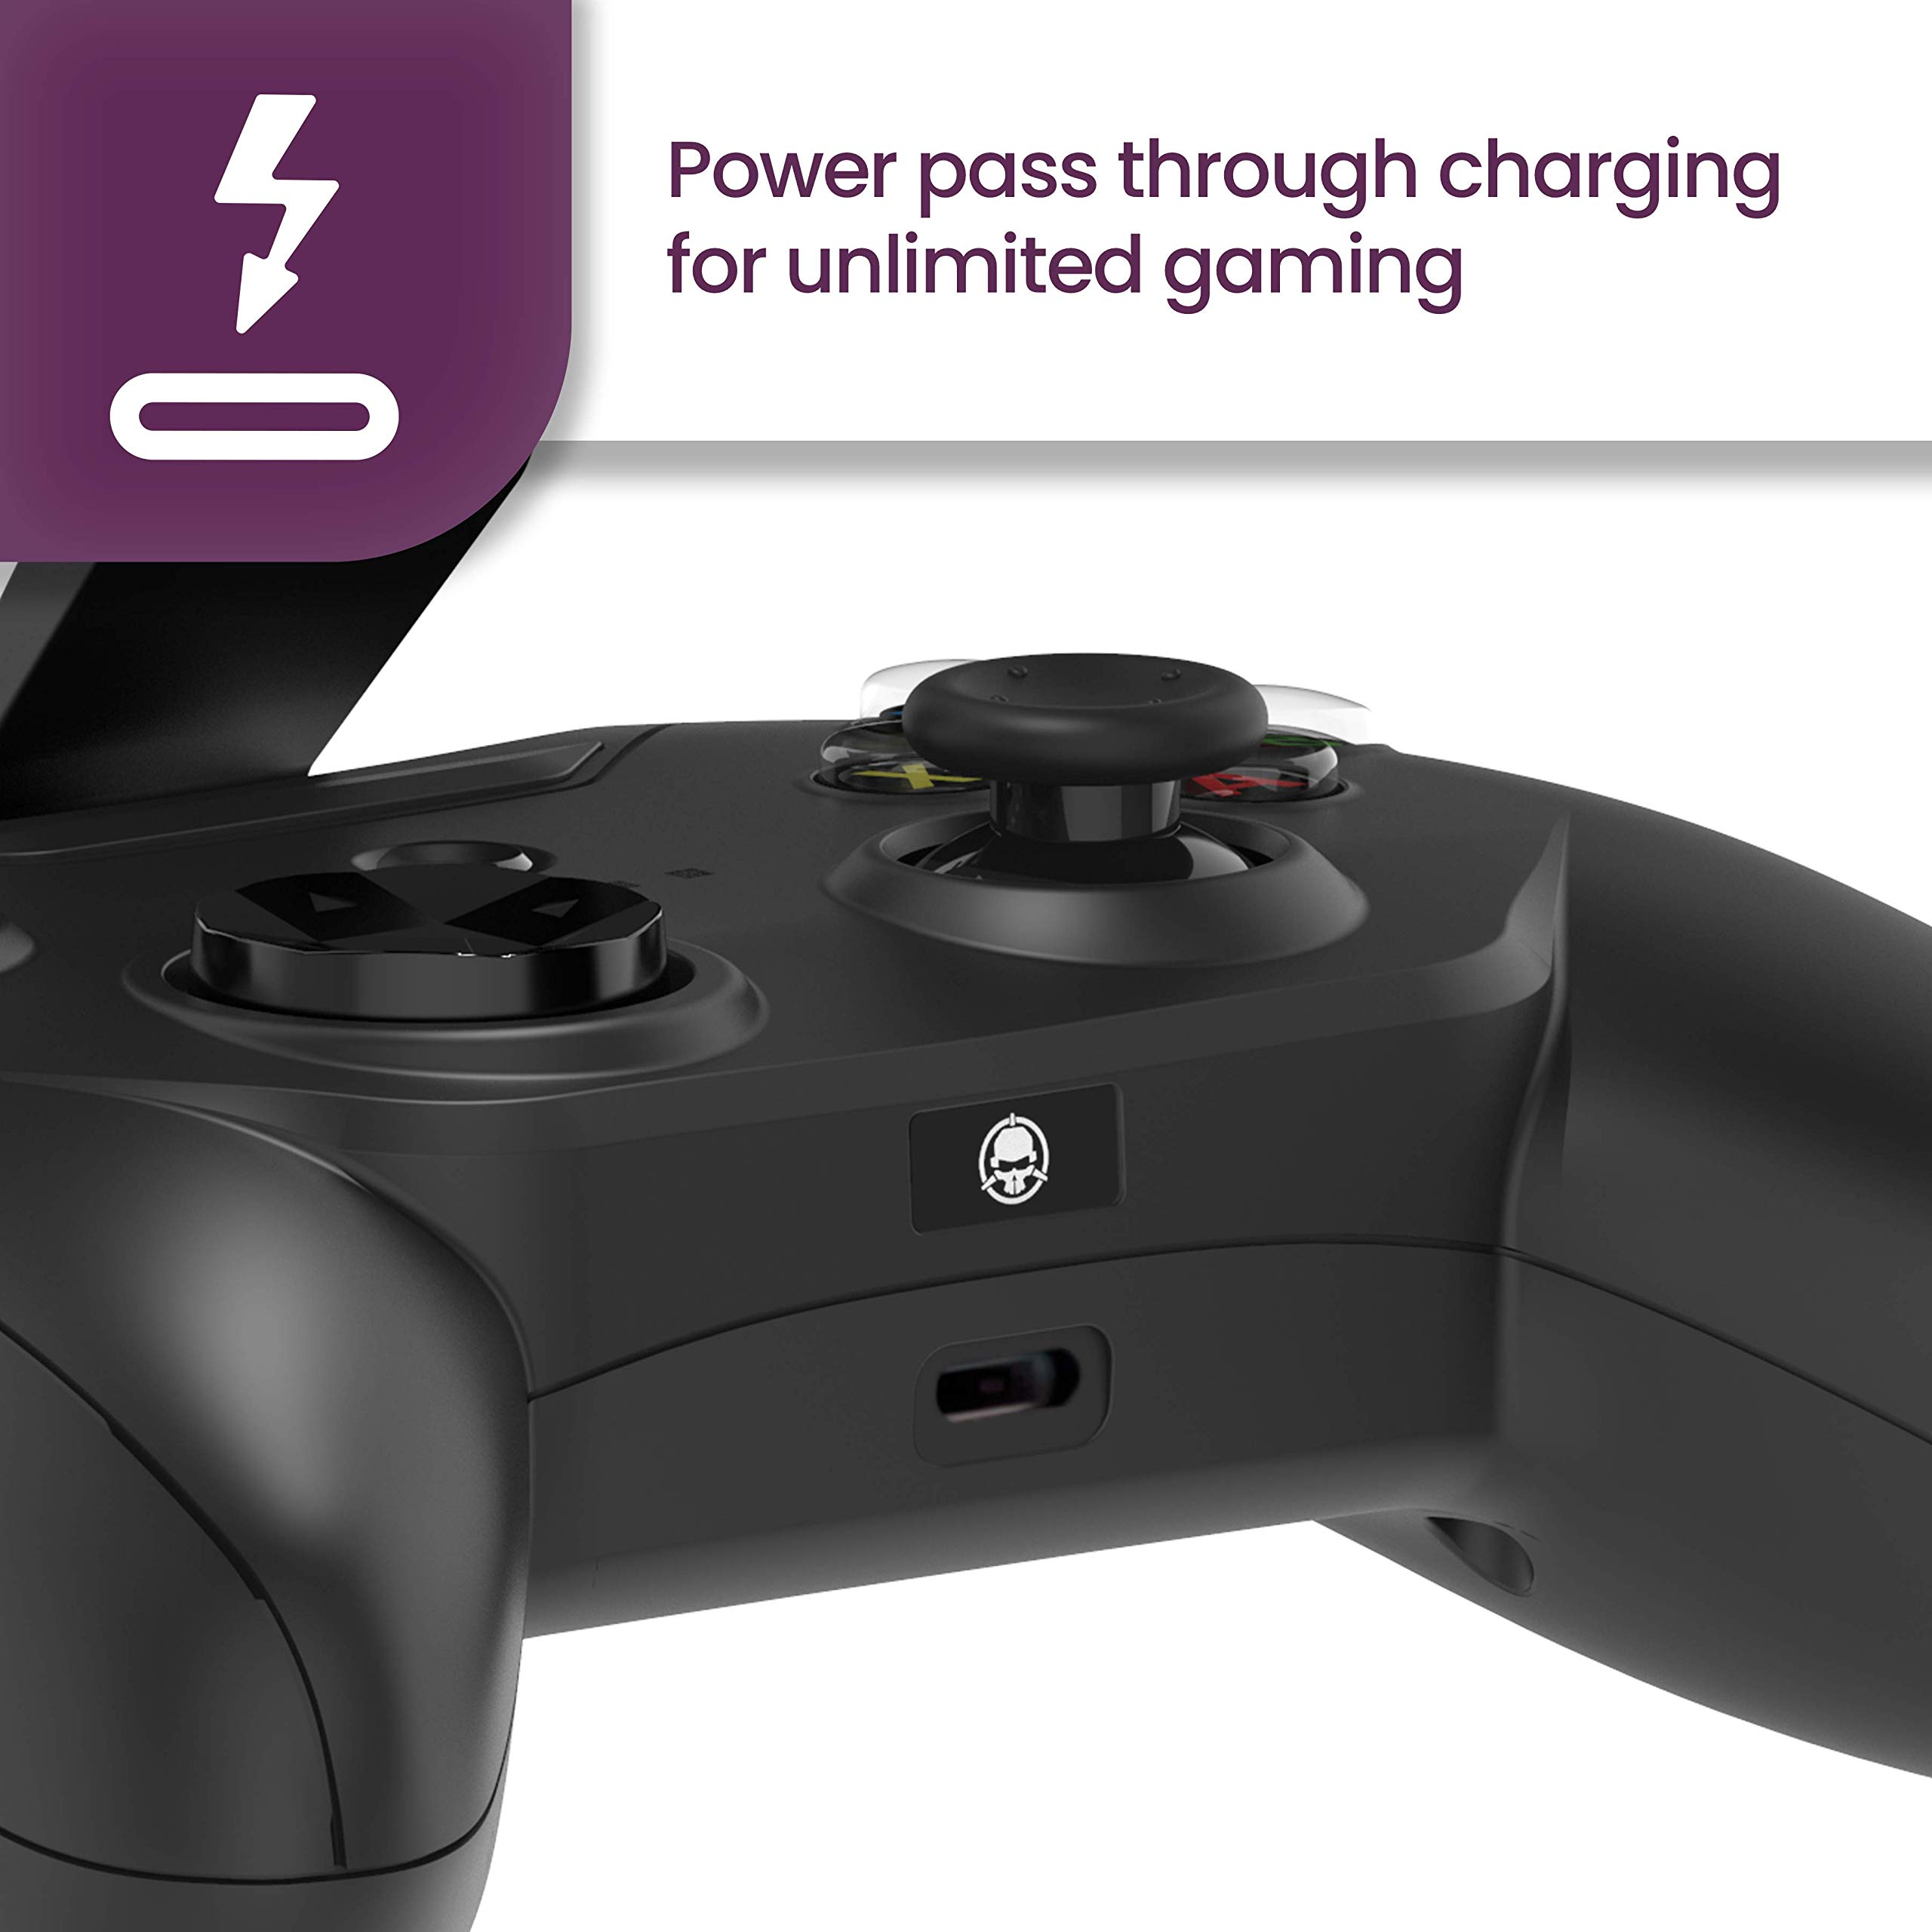 RiotPWR Mfi Certified Gamepad Controller for iOS iPhone - Wired with L3 + R3 Buttons, Power Pass Through Charging, Improved 8 Way D-Pad, and redesigned ZeroG Mobile Device